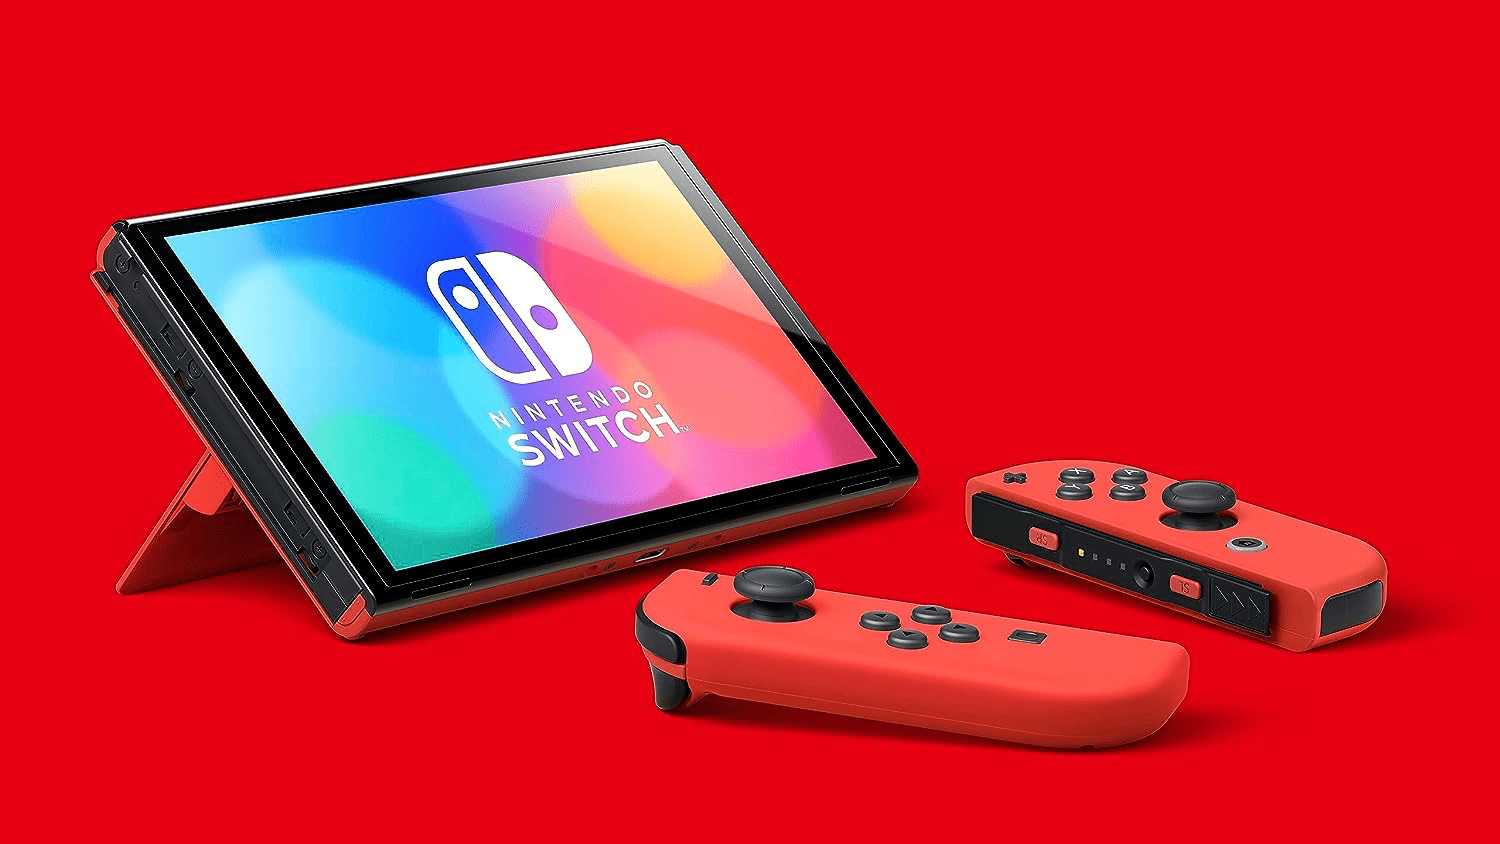 Nintendo Switch - Oled Mario Red Special Edition (New)